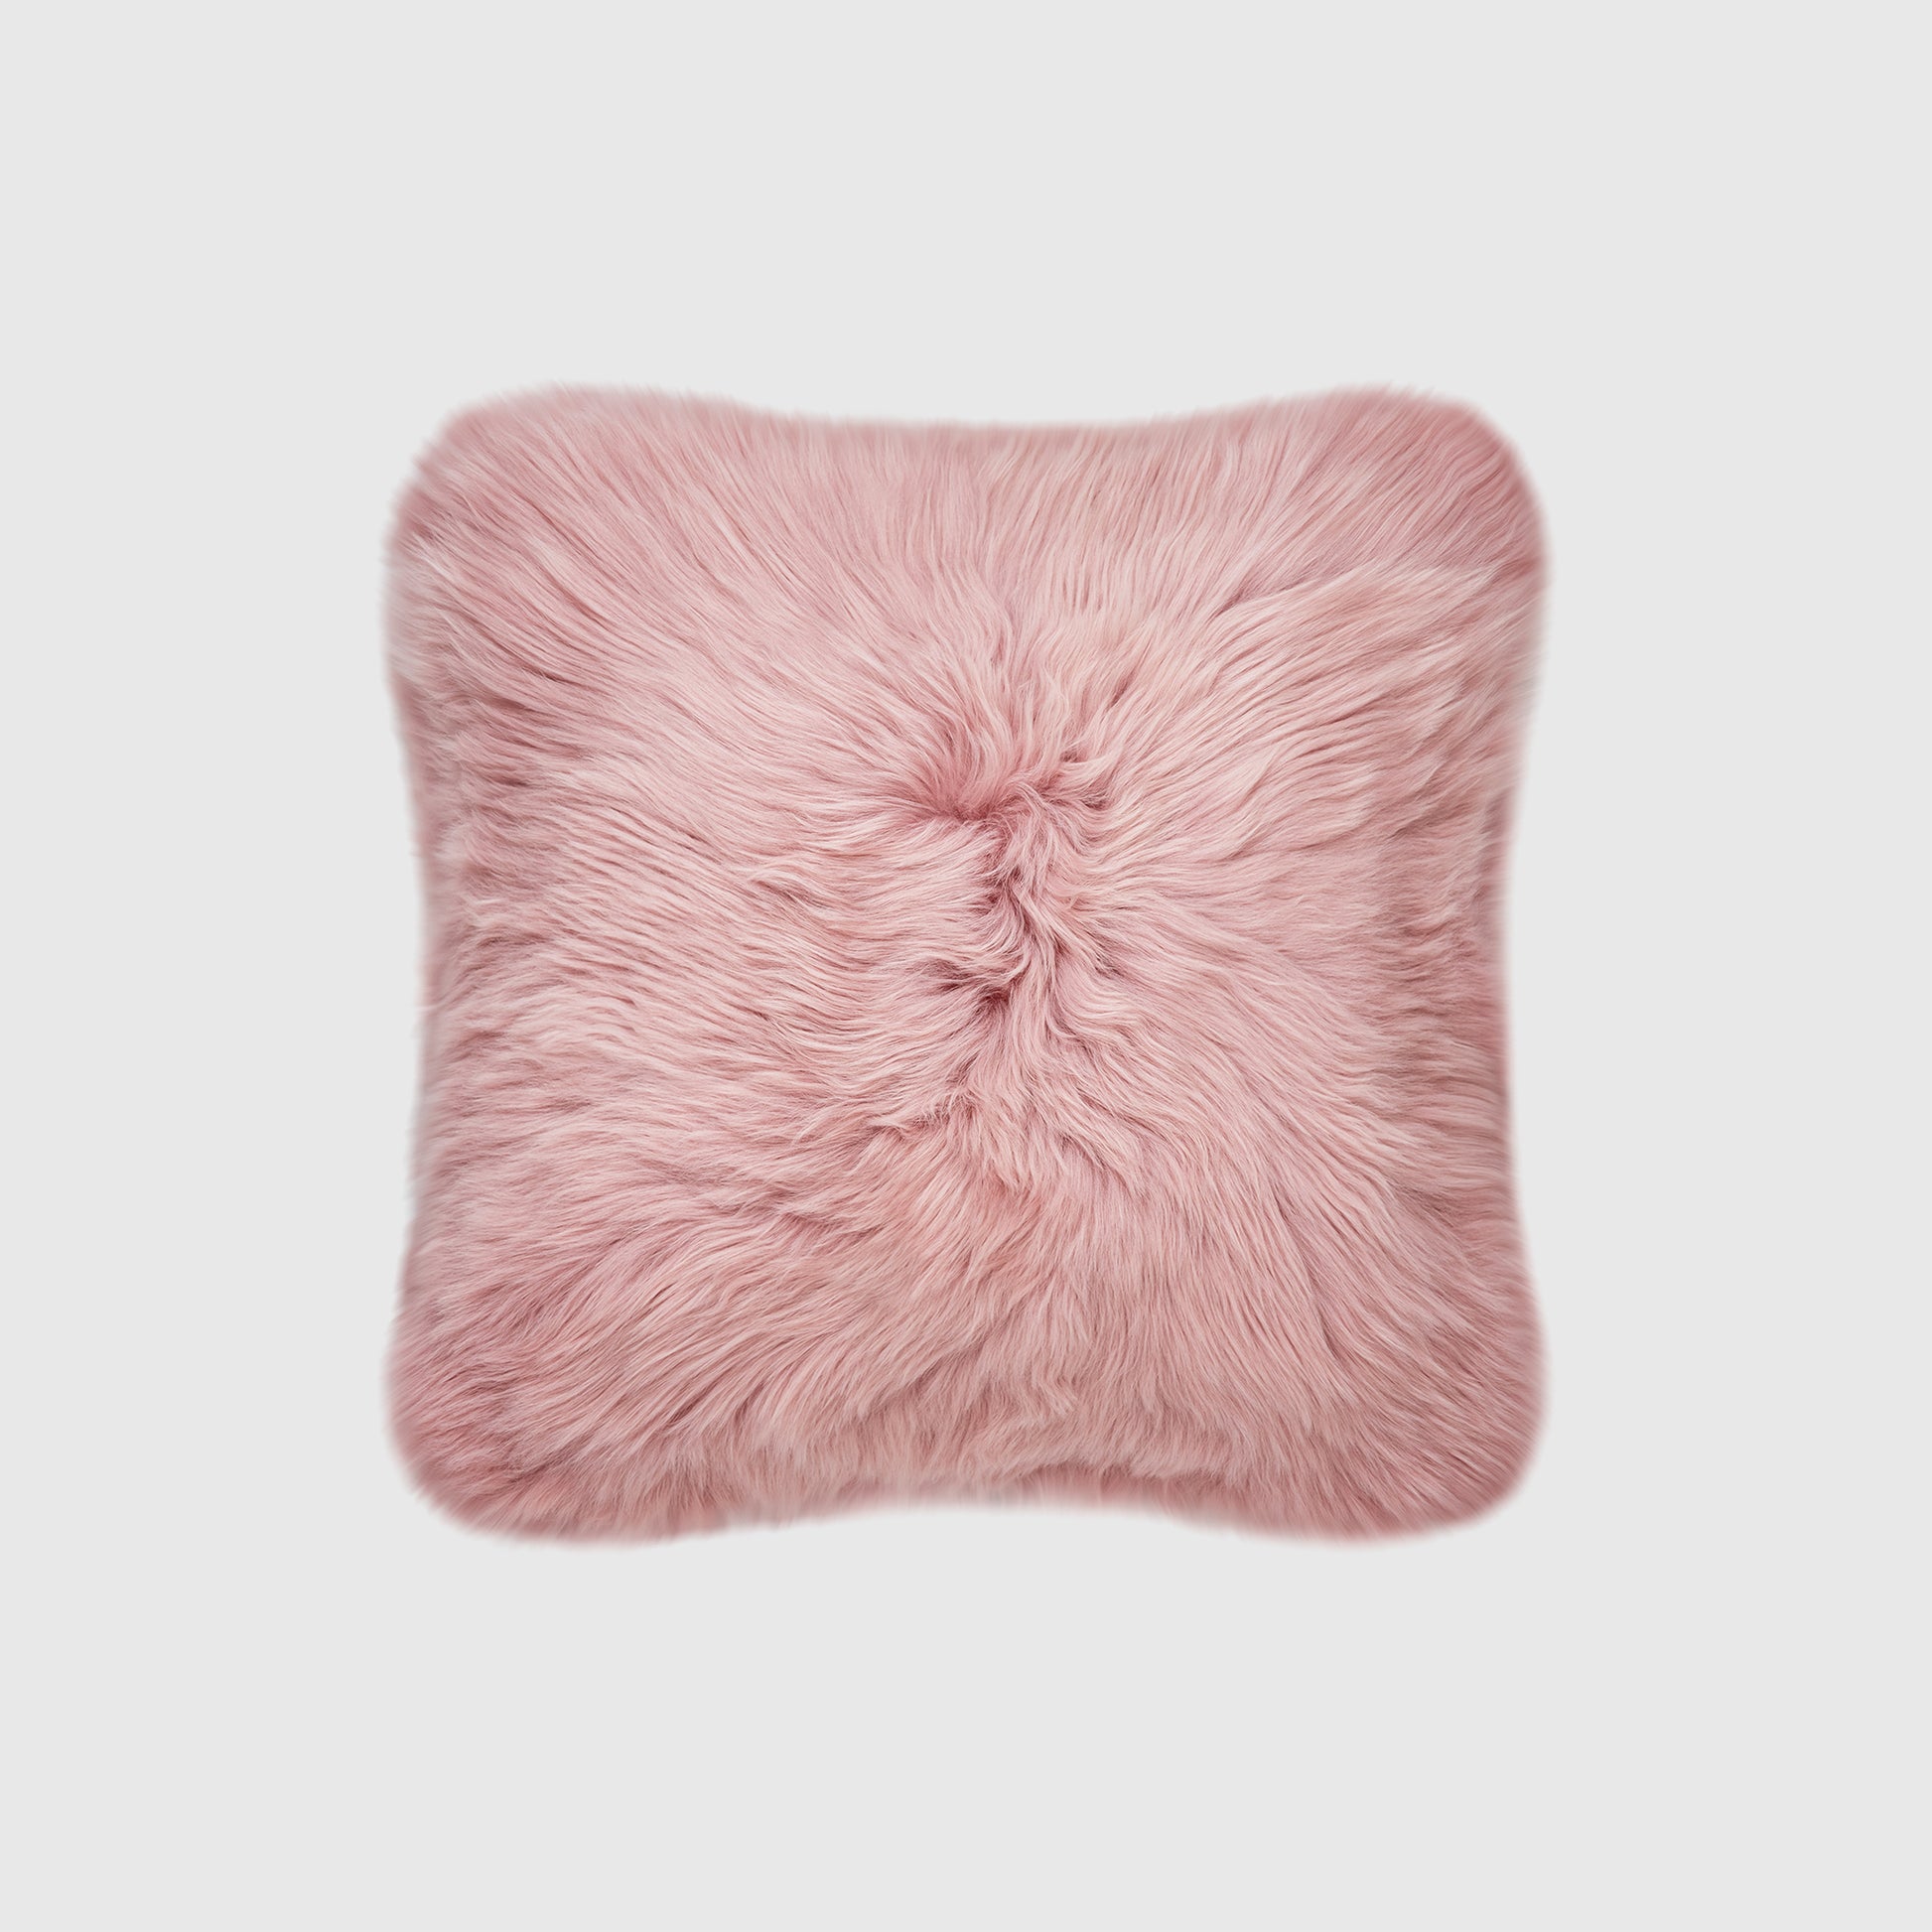 The Mood | Charlie Sheepskin Double-sided 16"x16" Pillow, Rosa